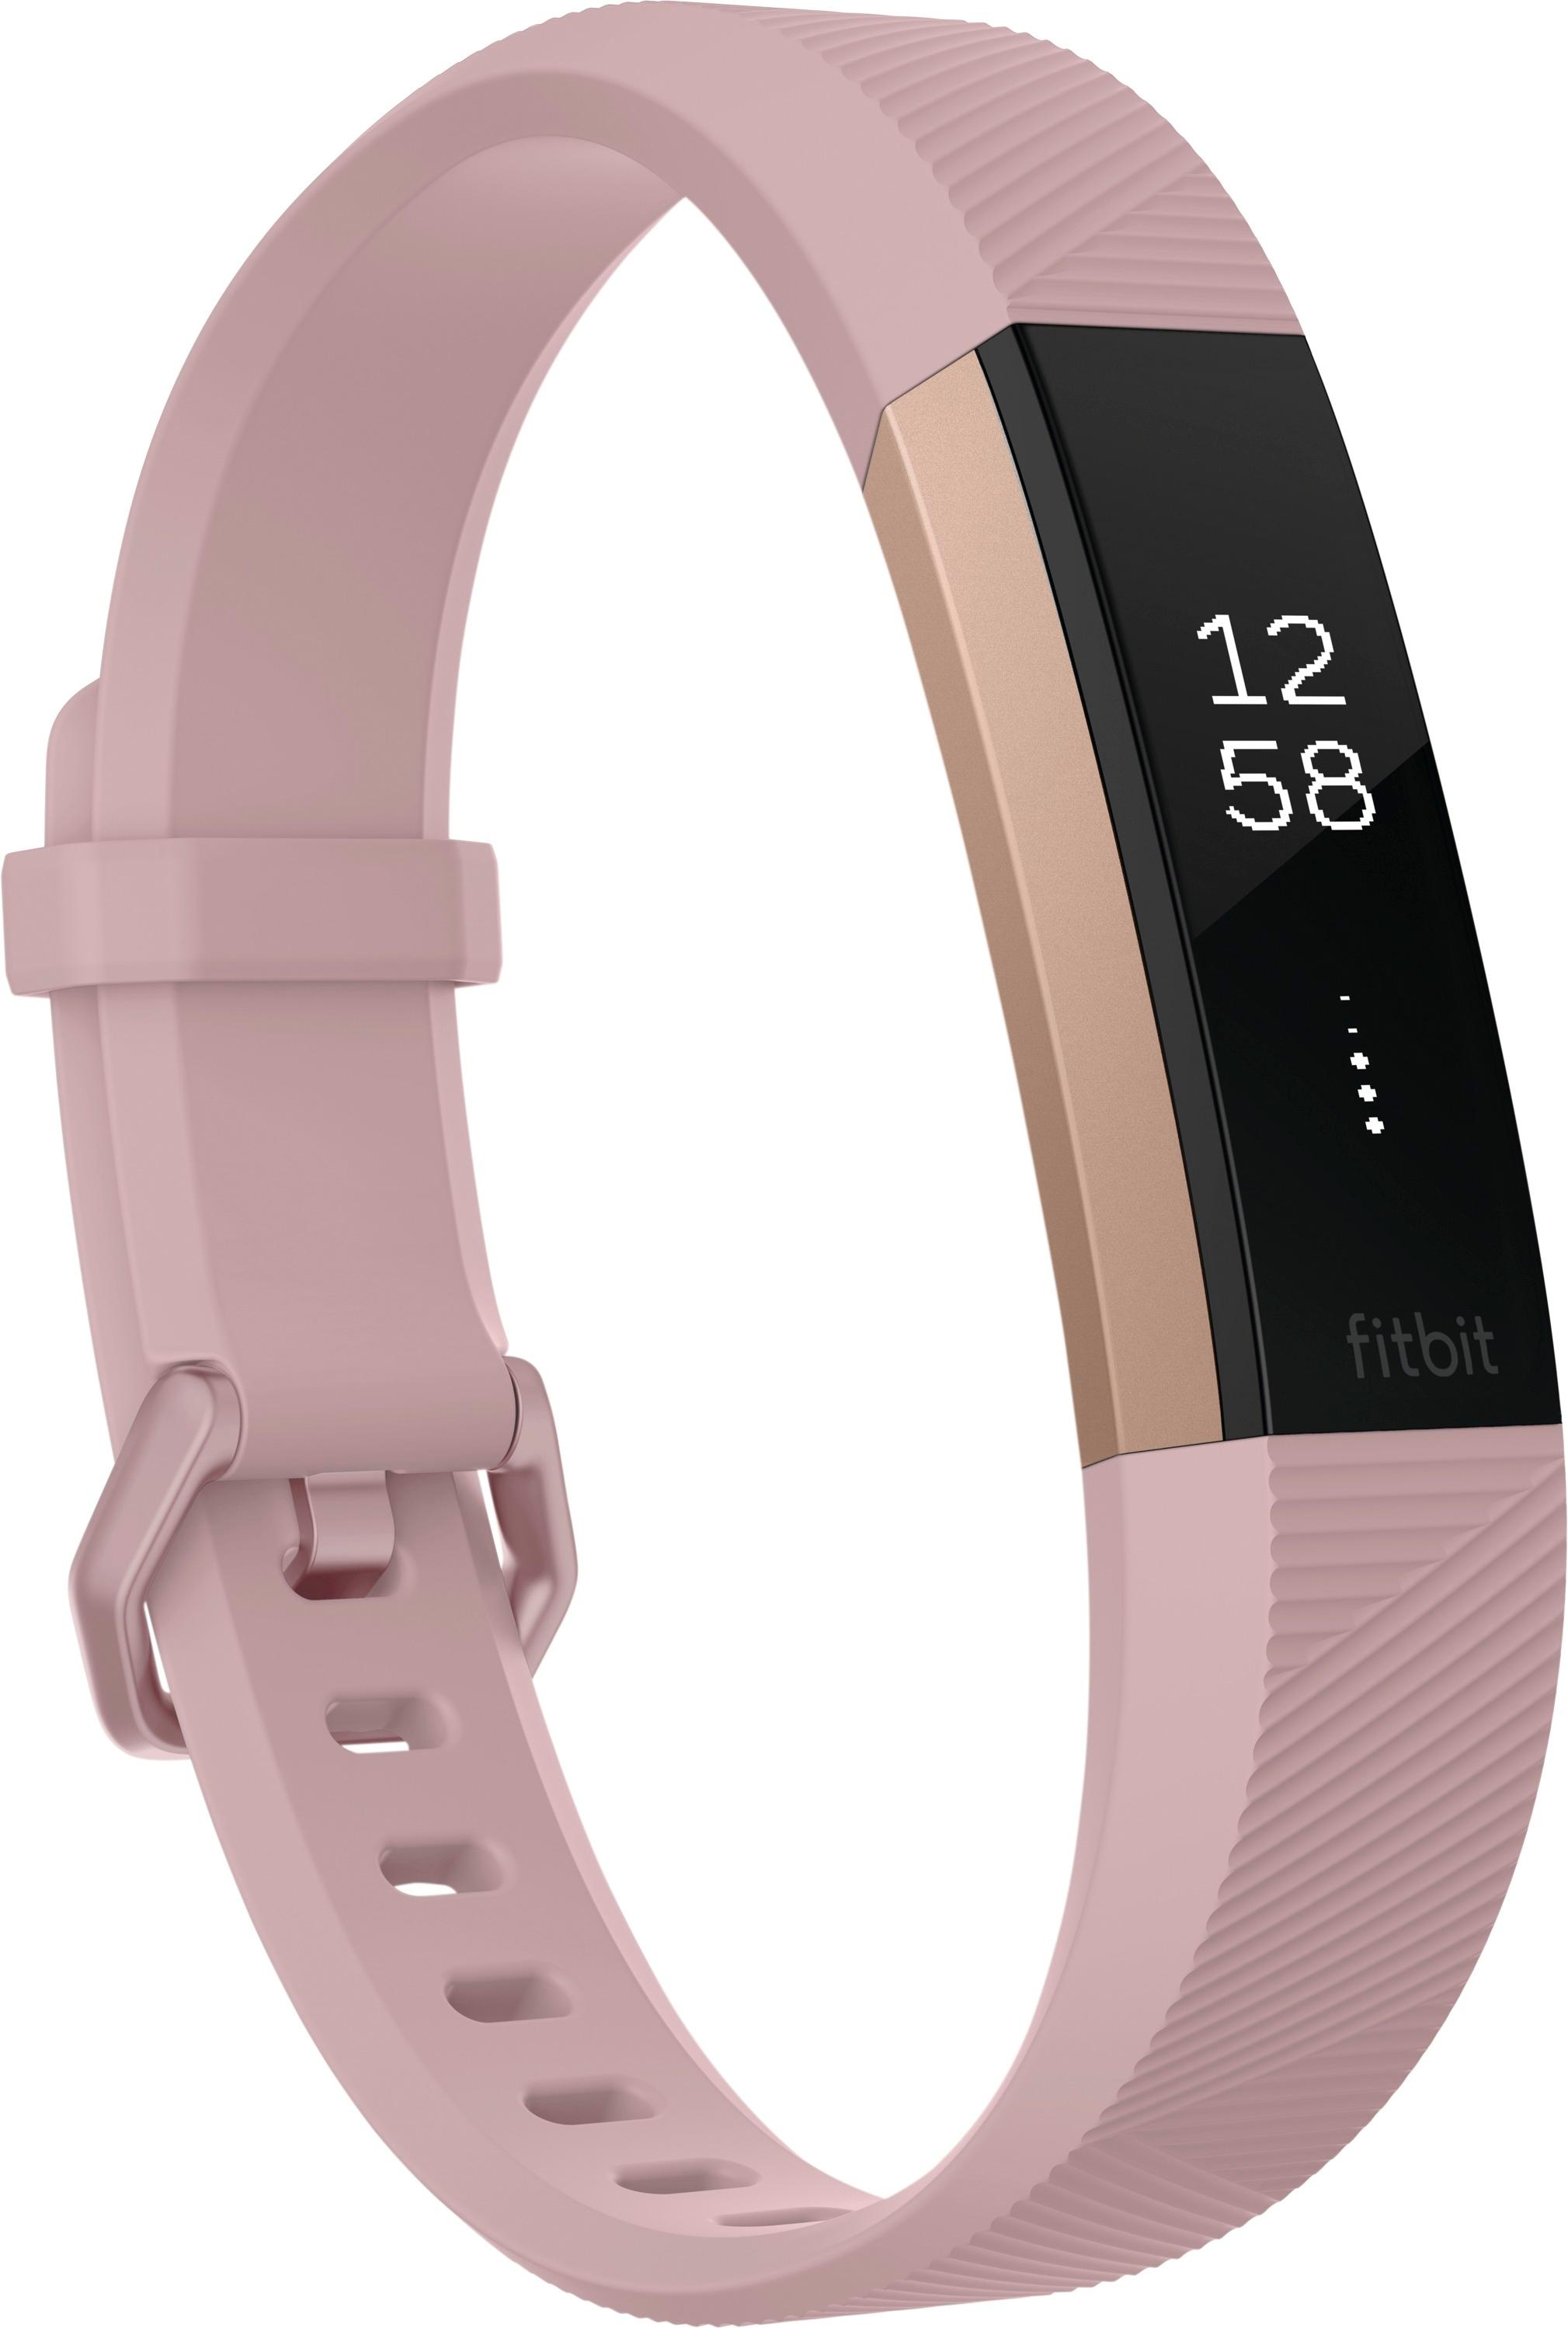 Fitbit Blaze SmartWatch Fitness Activity Tracker Heart Rate Slim Pink Gold Small